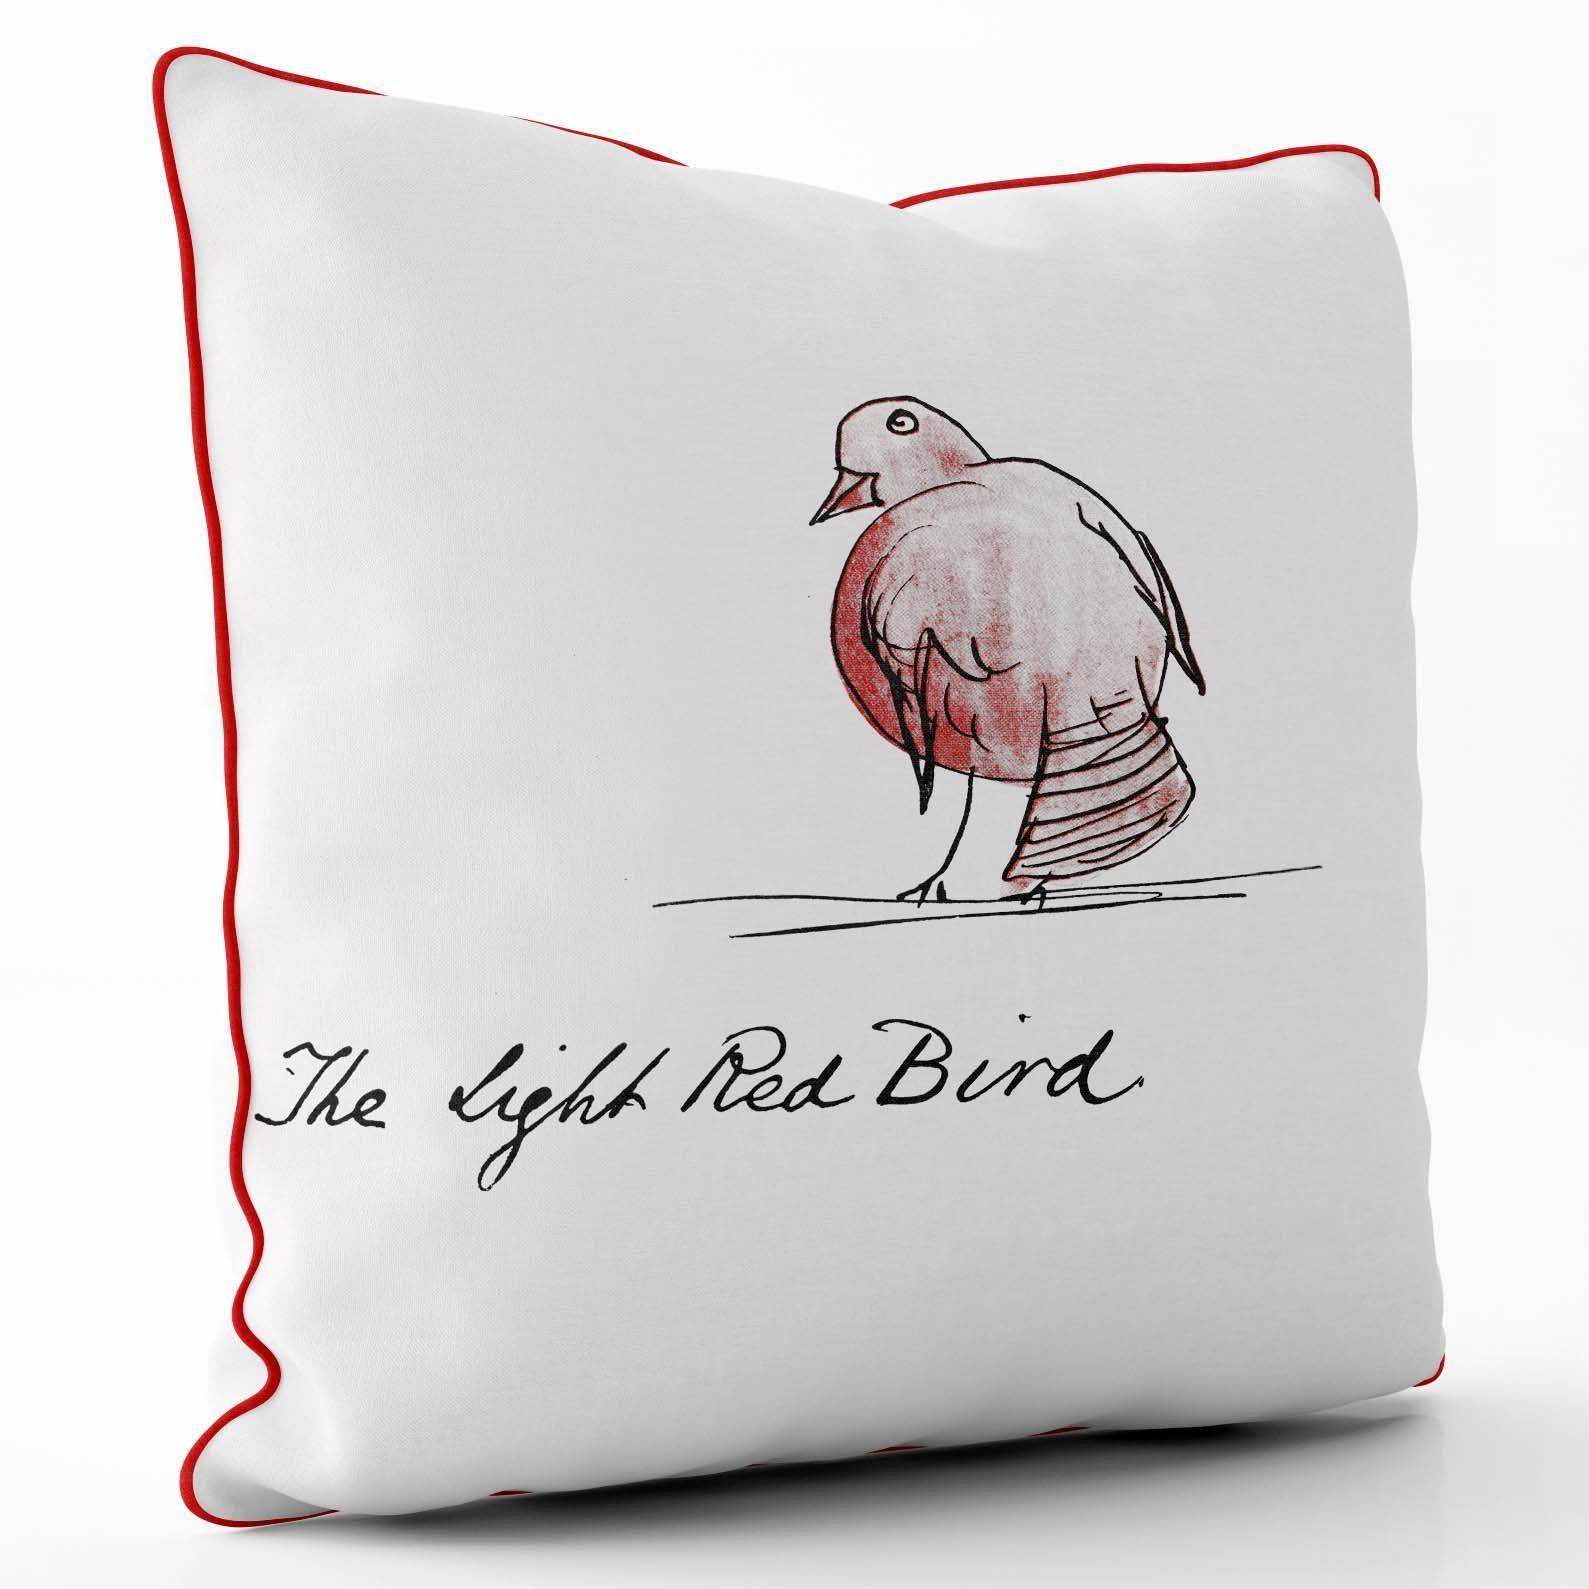 The Little Red Bird - Edward Lear Cushion - Red Piping - Handmade Cushions UK - WeLoveCushions